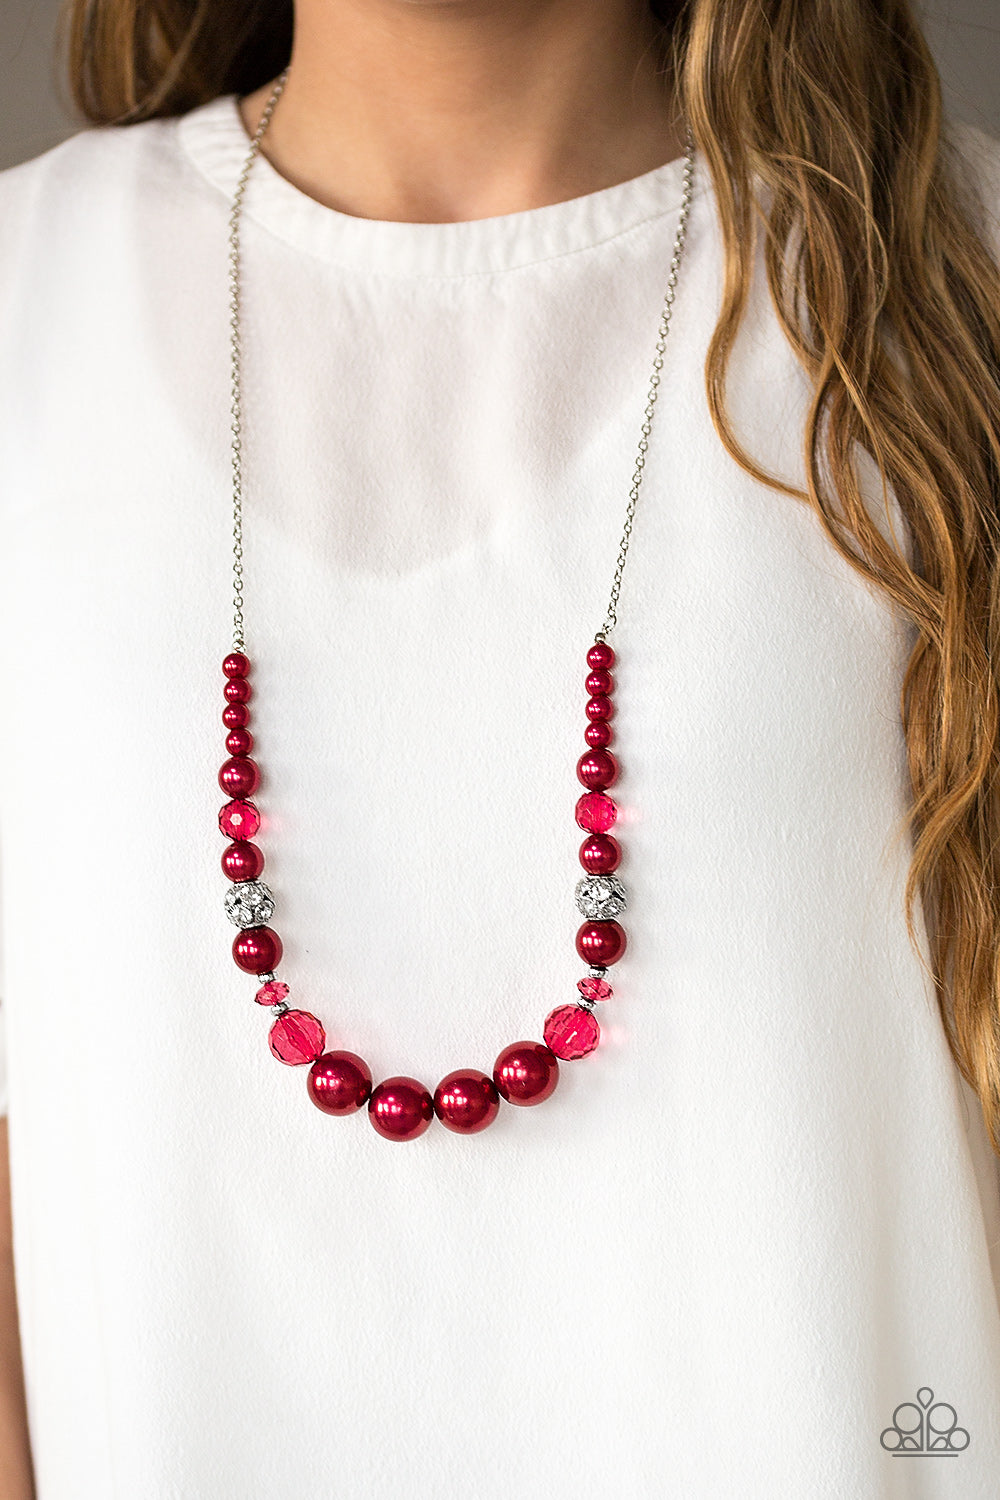 The Wedding Party - red - Paparazzi necklace